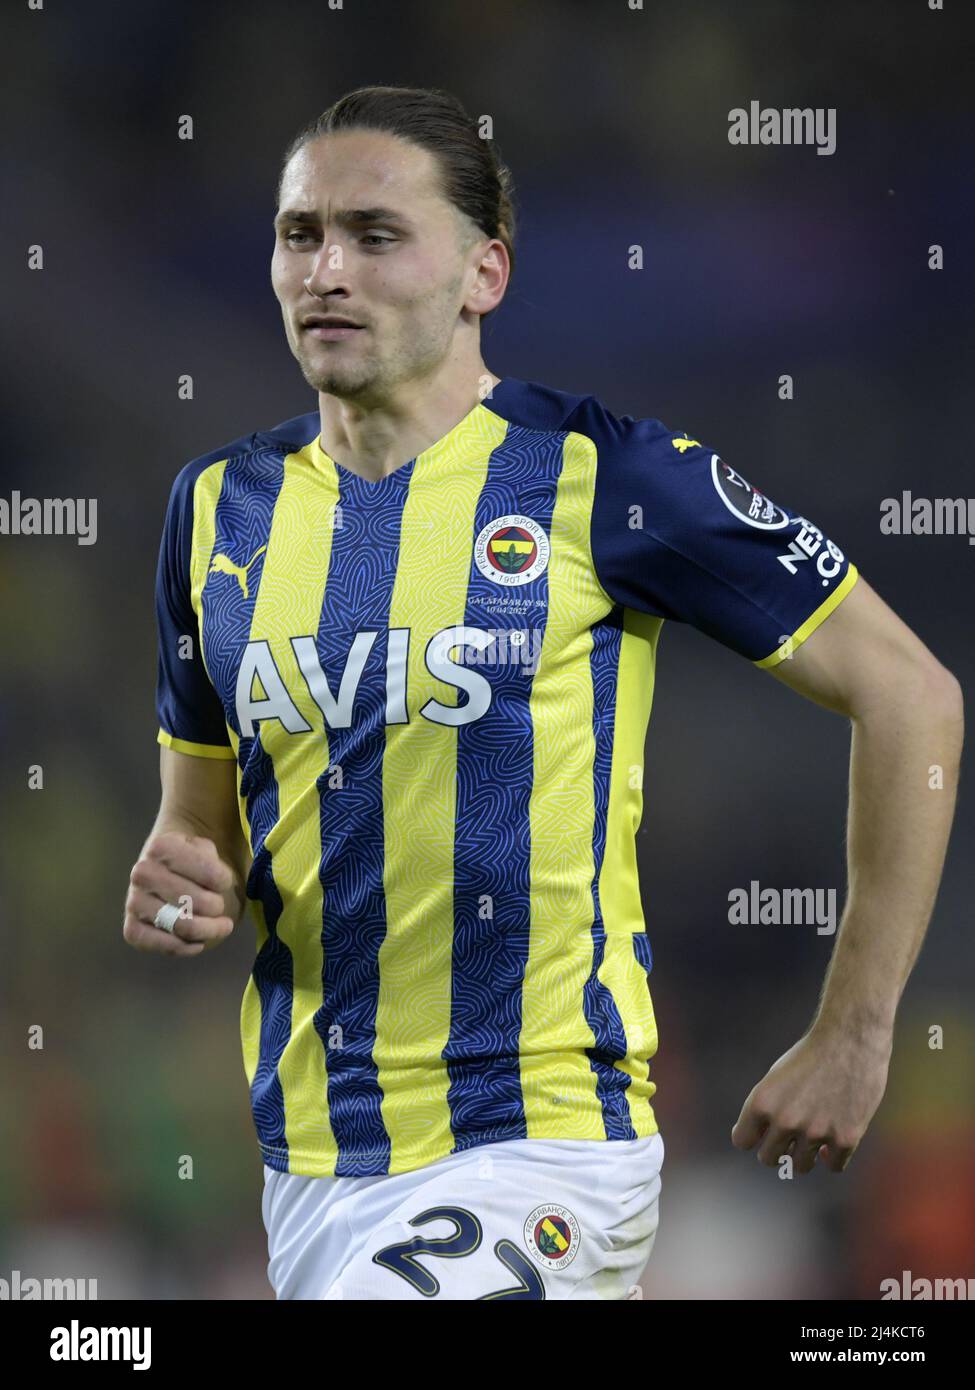 ISTANBUL - Miguel Crespo da Silva of Fenerbahce SK during the Turkish  Superliga match between Fenerbahce AS and Galatasaray AS at Ulker Fenerbahce  Sukru Saracoglu Stadium on April 10, 2022 in Istanbul,